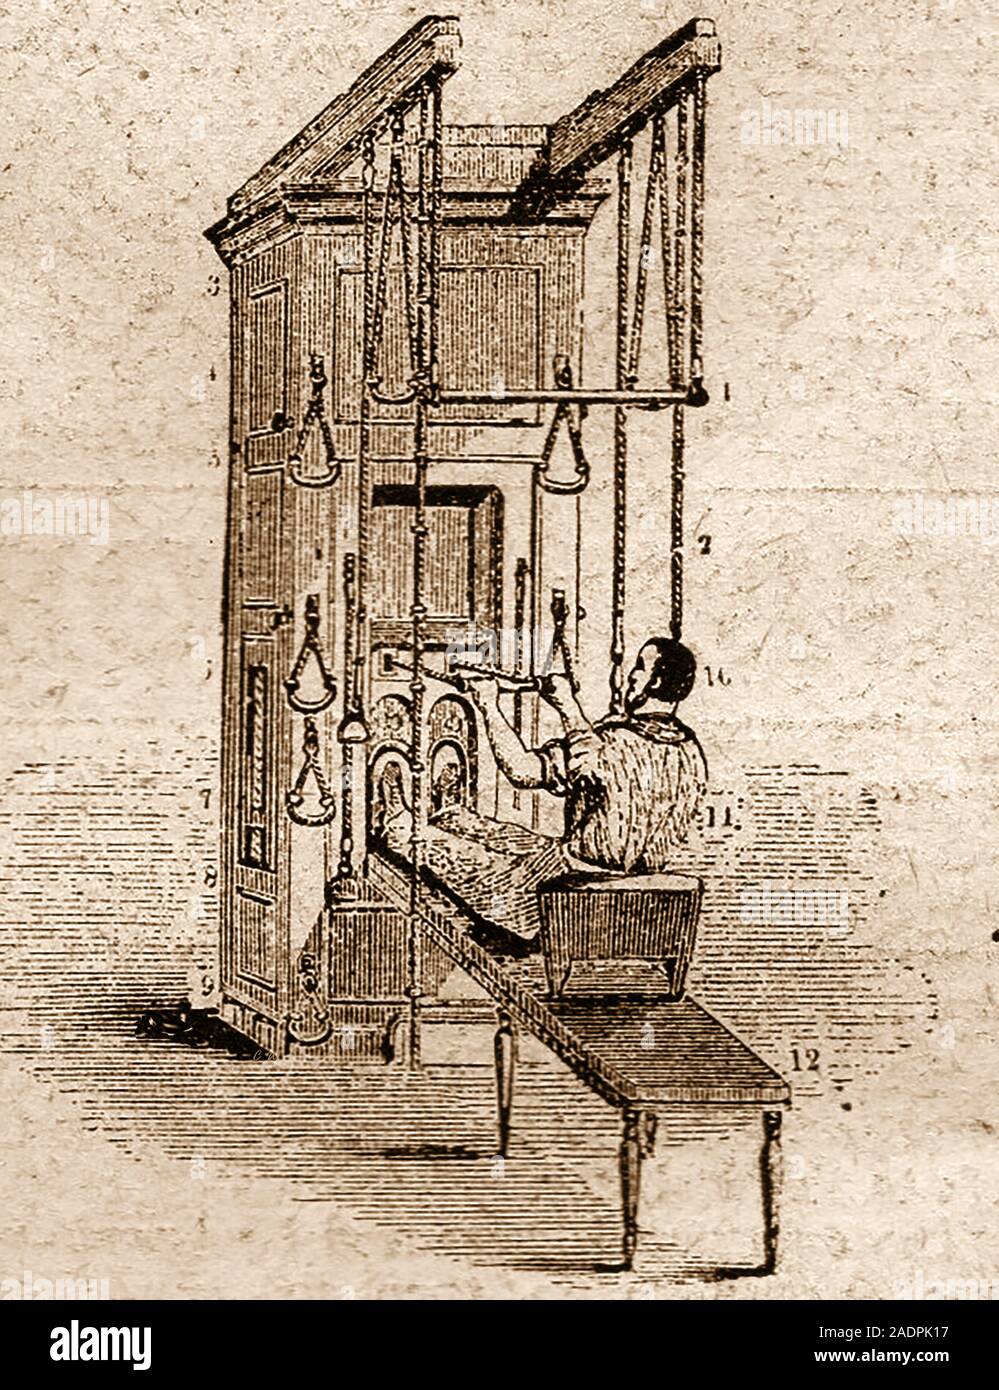 Strange early inventions -  A wooden Victorian exercise or keep fit machine. Though never manufactured commercially the idea did give birth to modern more compact models. Stock Photo